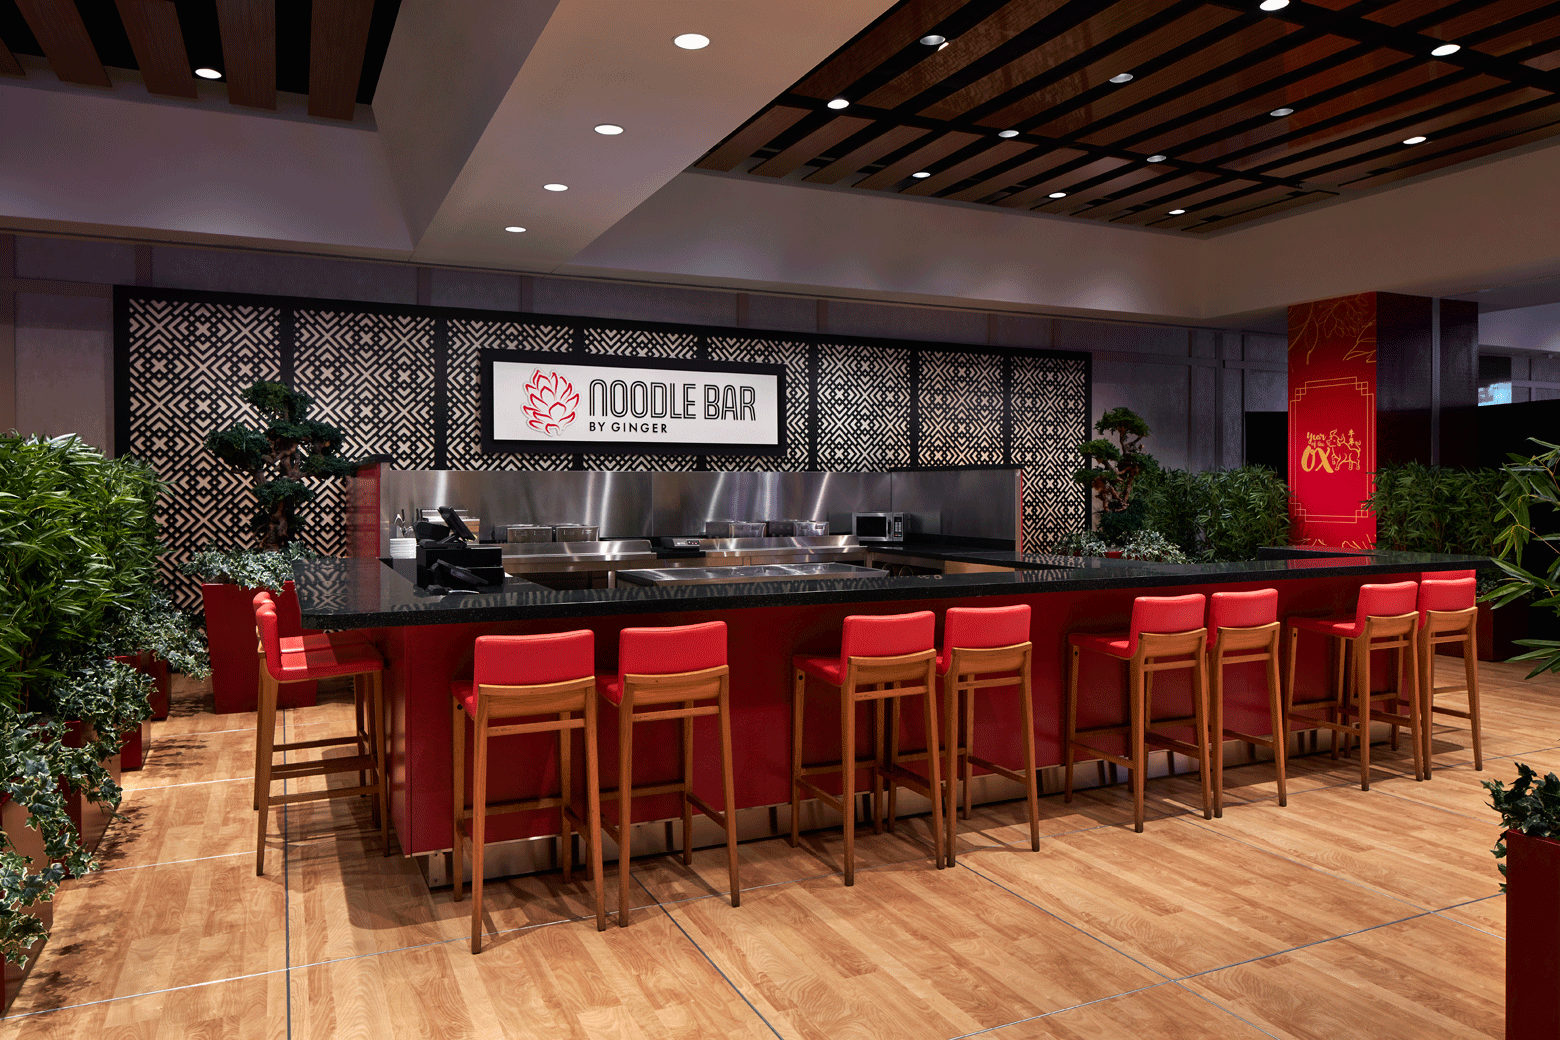 MGM gamblers can now saddle up to a noodle bar